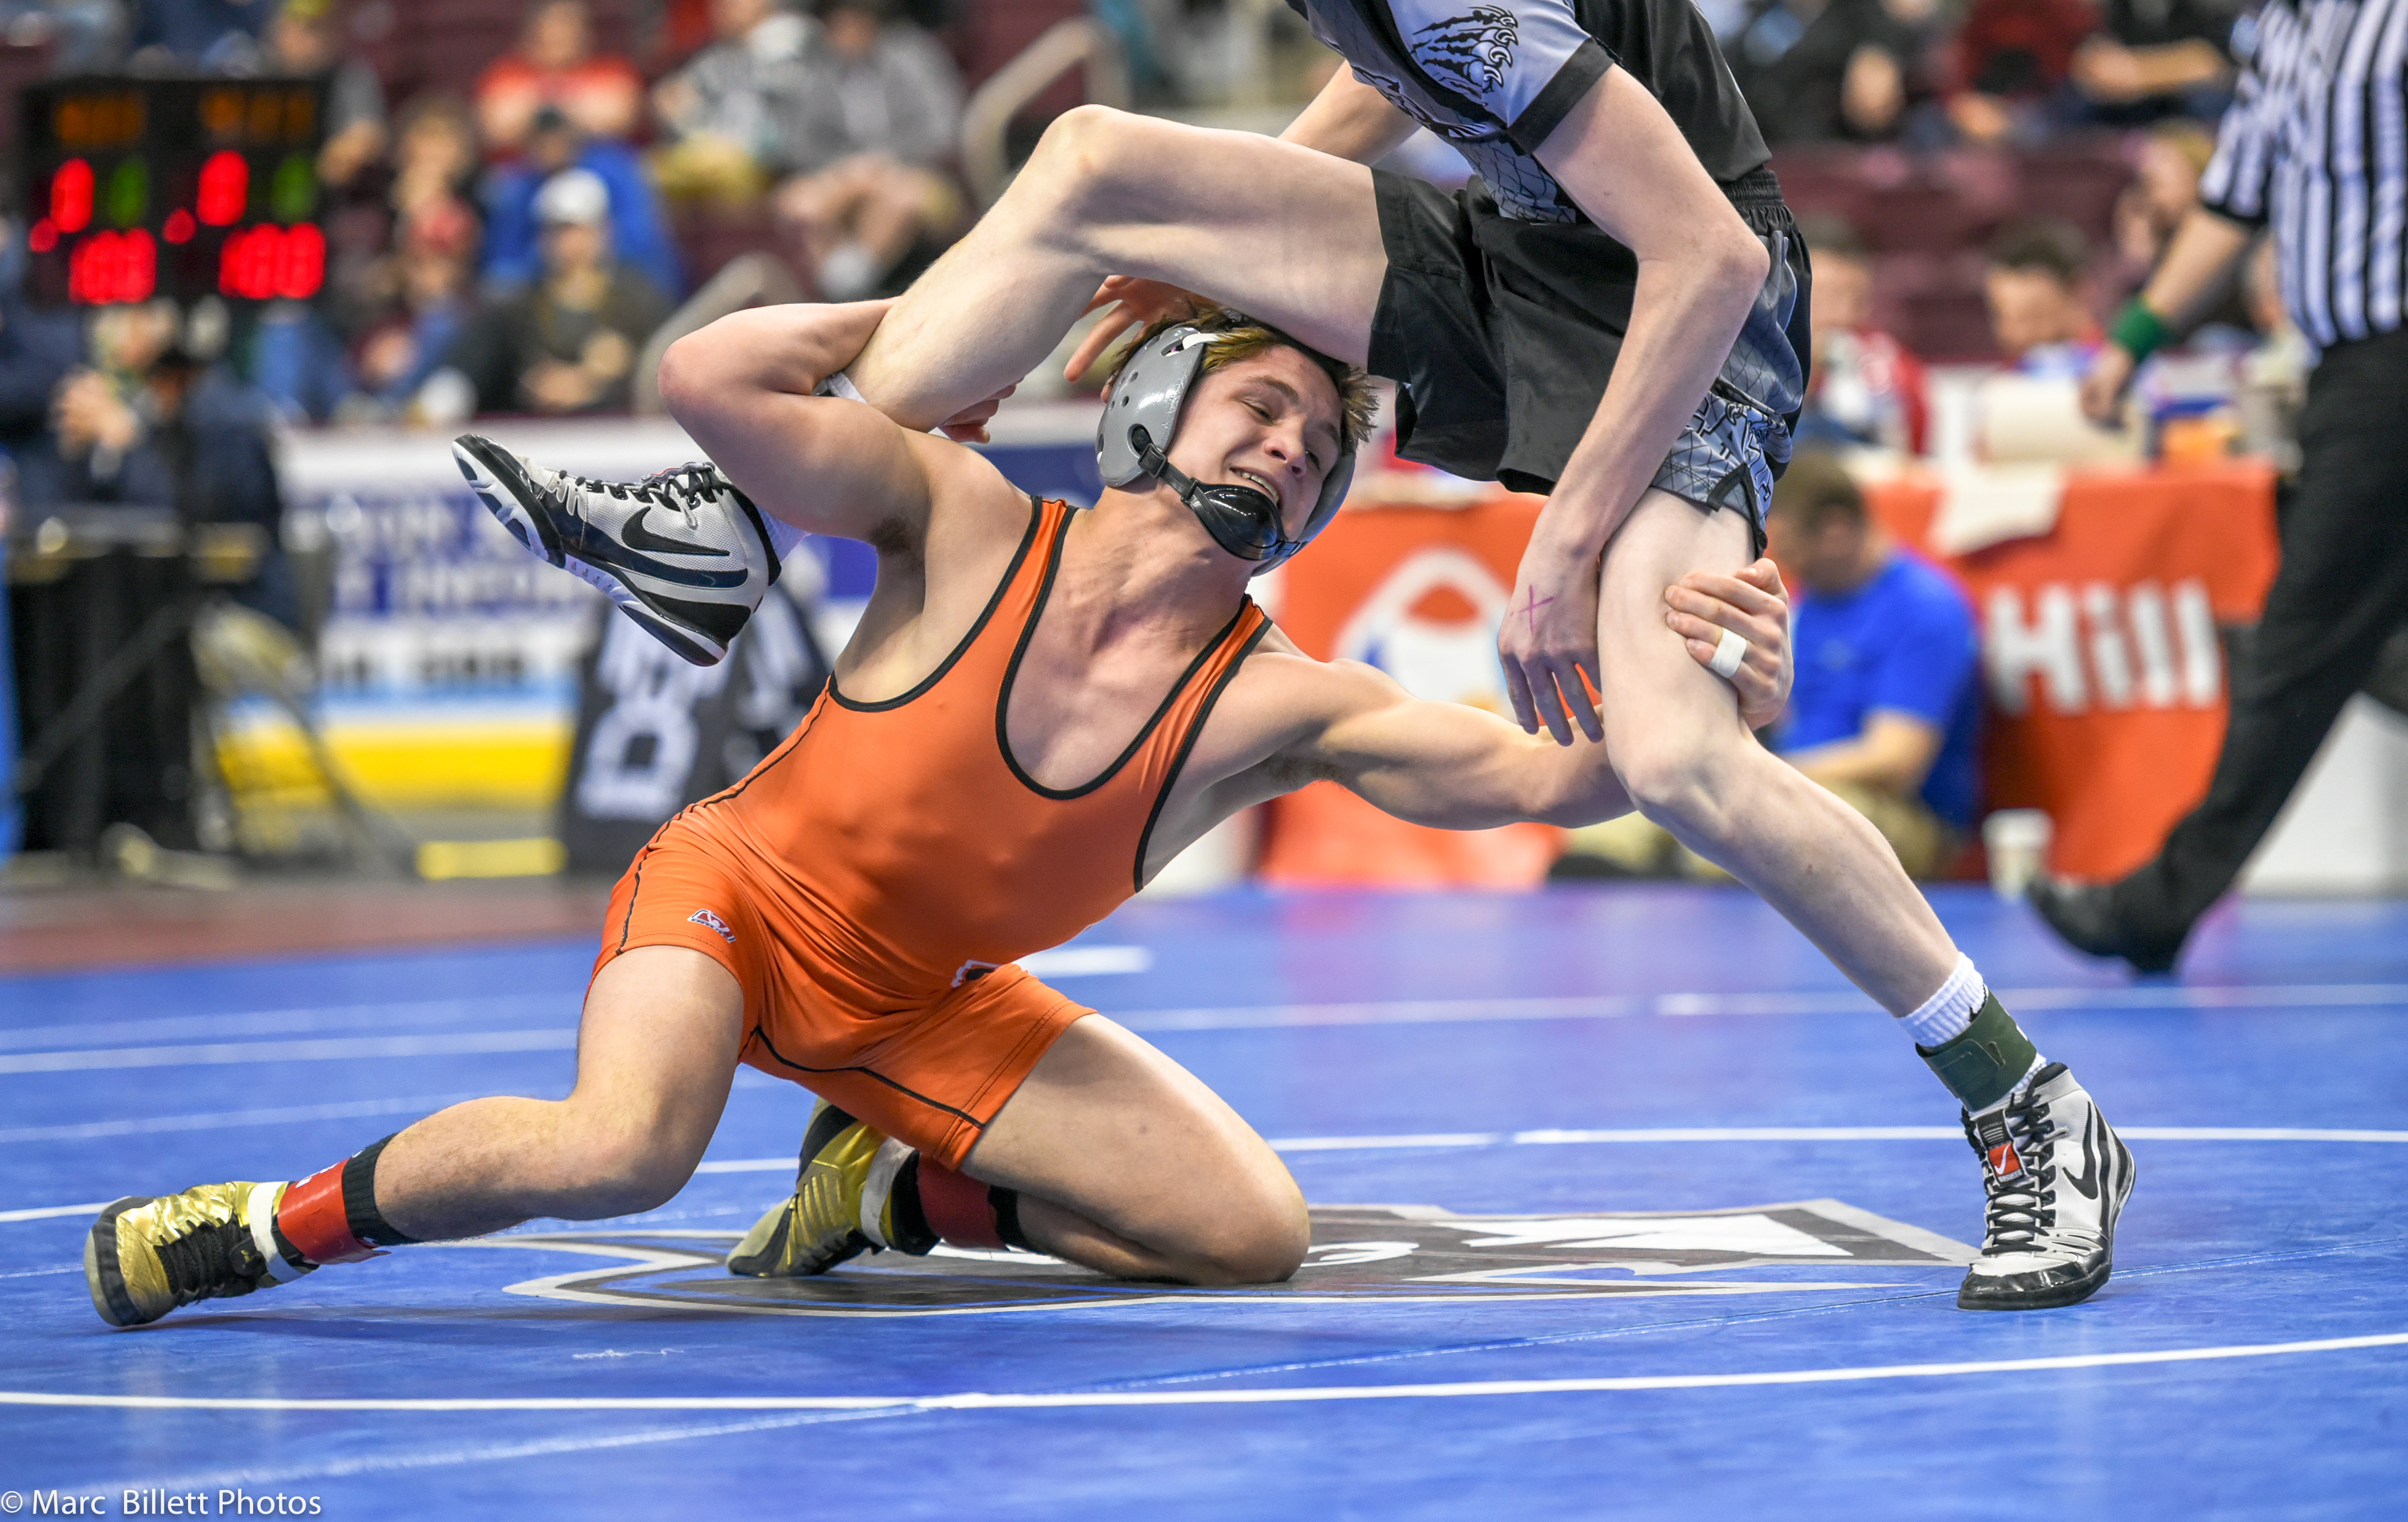 Pennsylvania Class AA State Finals & Medal Round Matches Set in Hershey